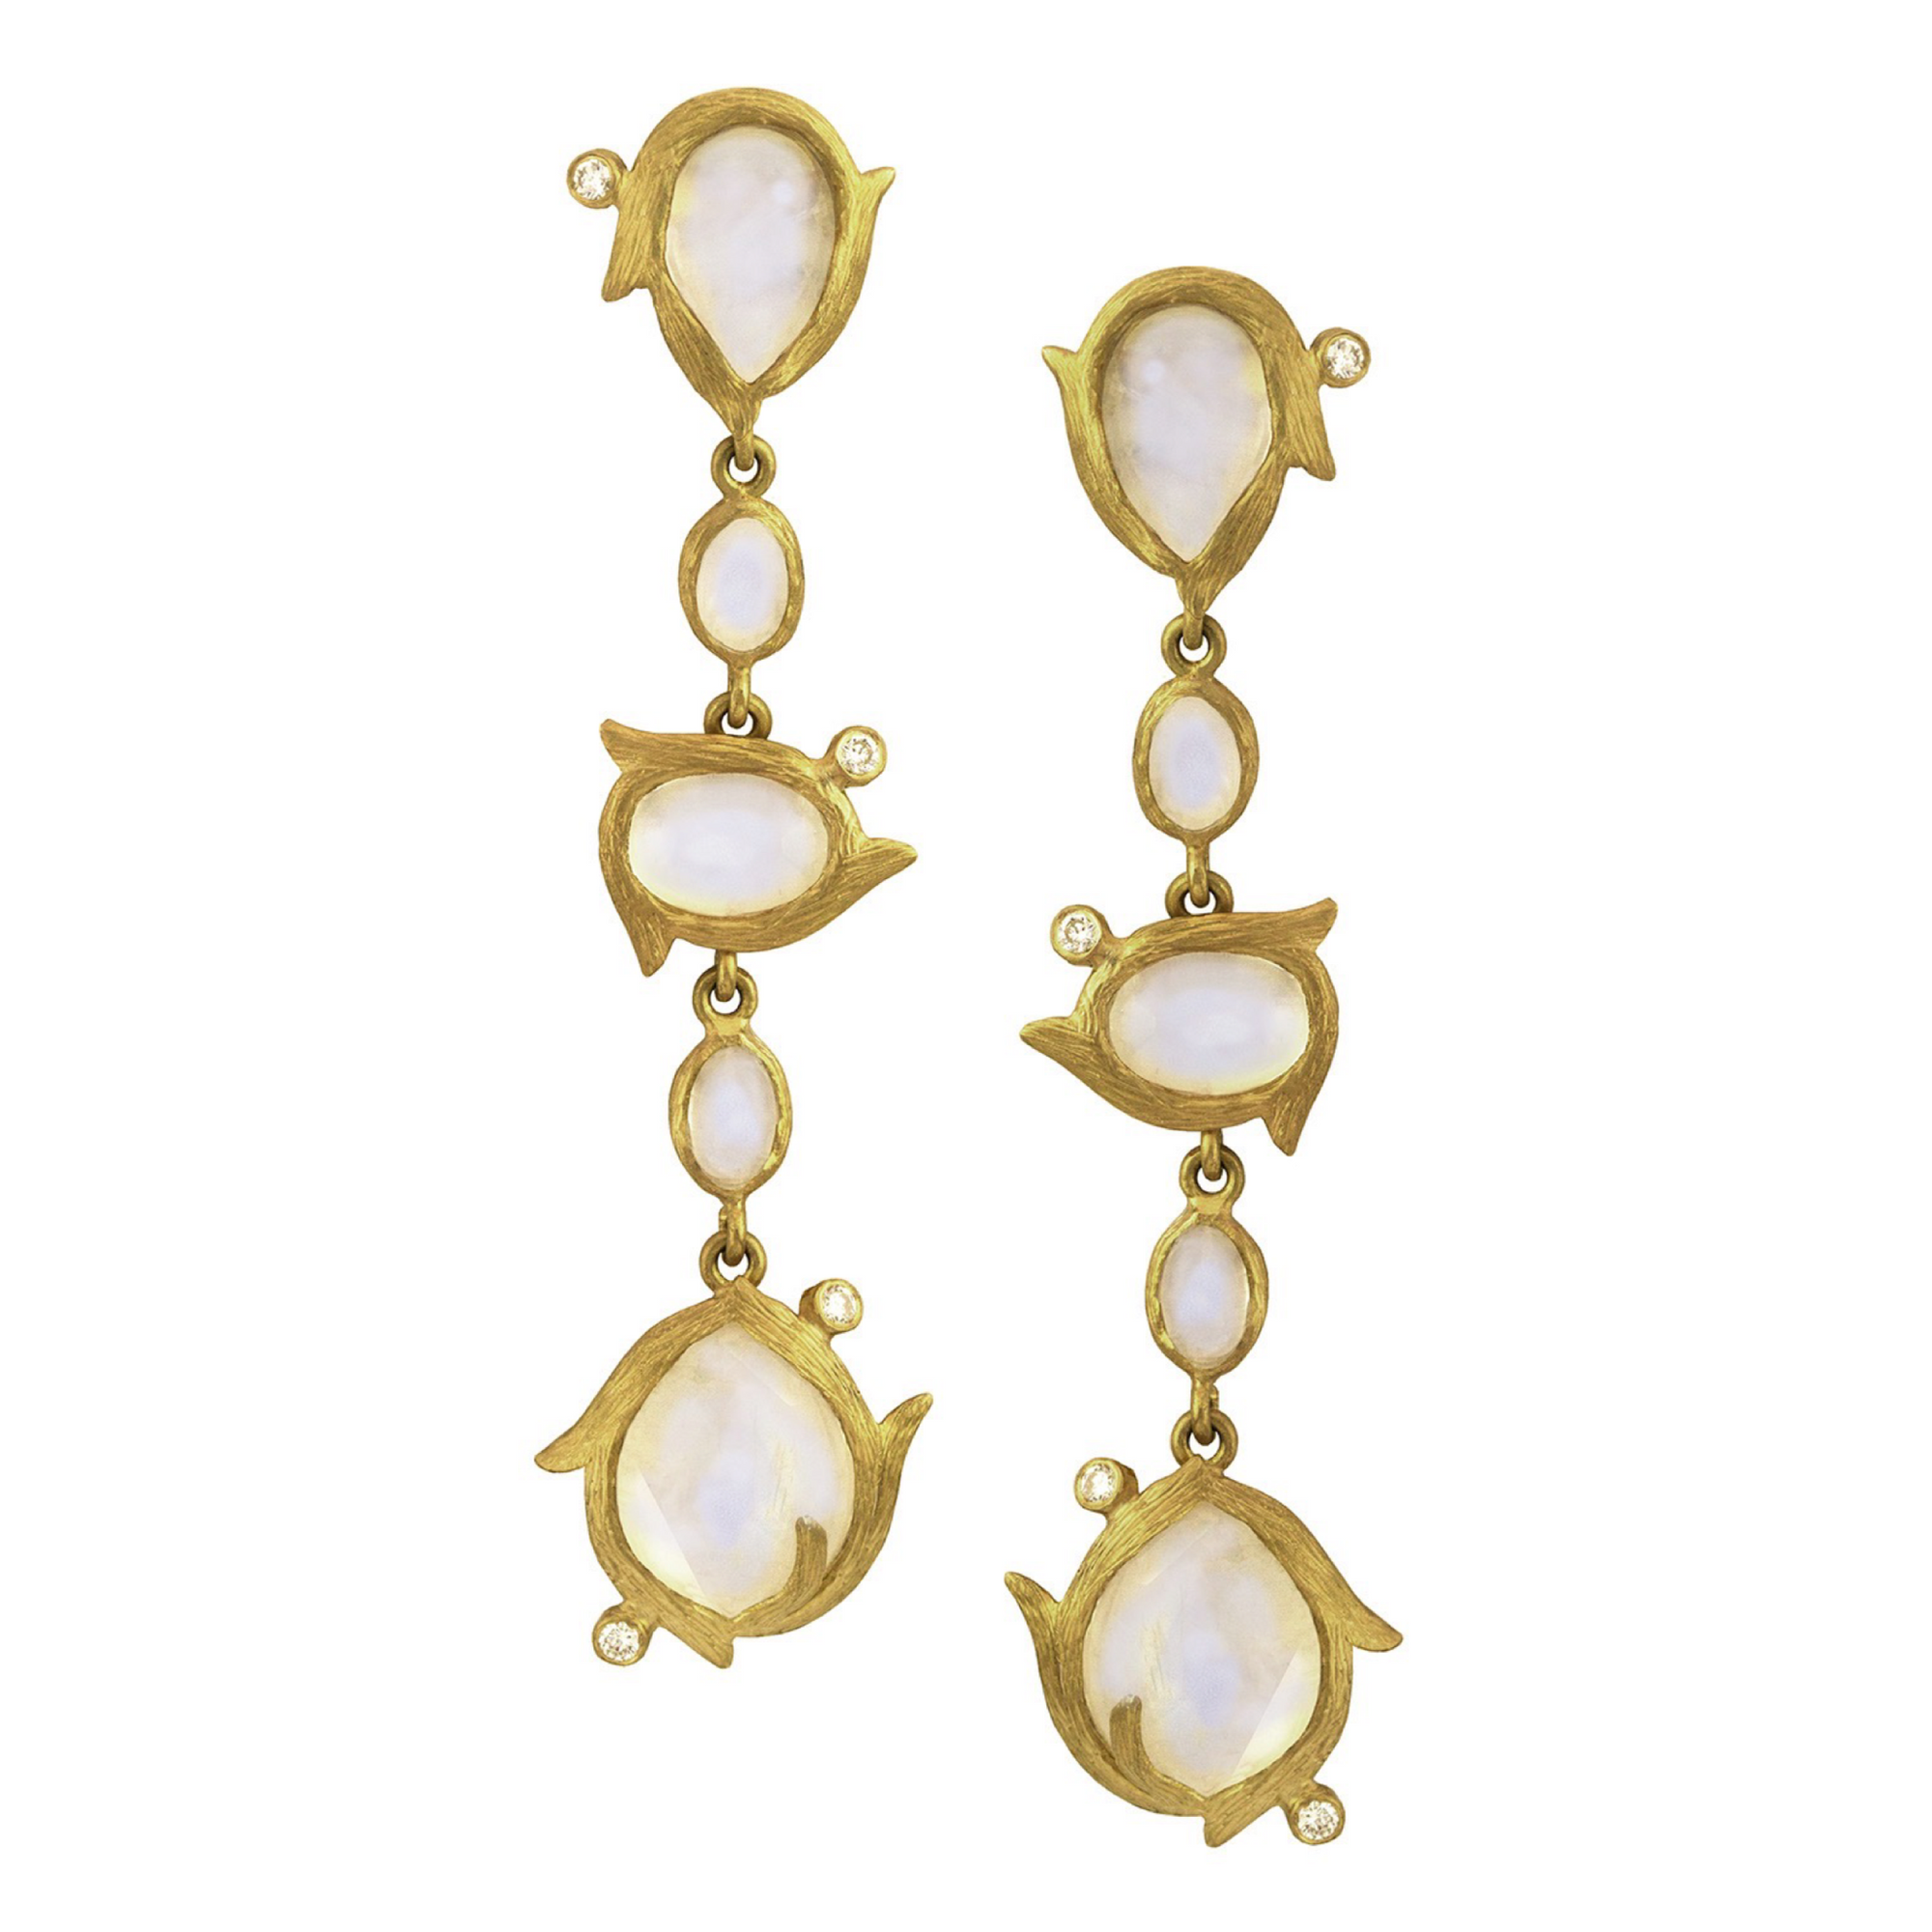 Vine Triple Drop Earrings by Laurie Kaiser available at Talisman Collection Fine Jewelers in El Dorado Hills, CA and online. They feature rainbow moonstones framed in 18k yellow gold vines accented with white brilliant diamonds, totaling 0.12 carats. The linear design gives these earrings a modern feel perfect for any sophisticated and stylish woman.